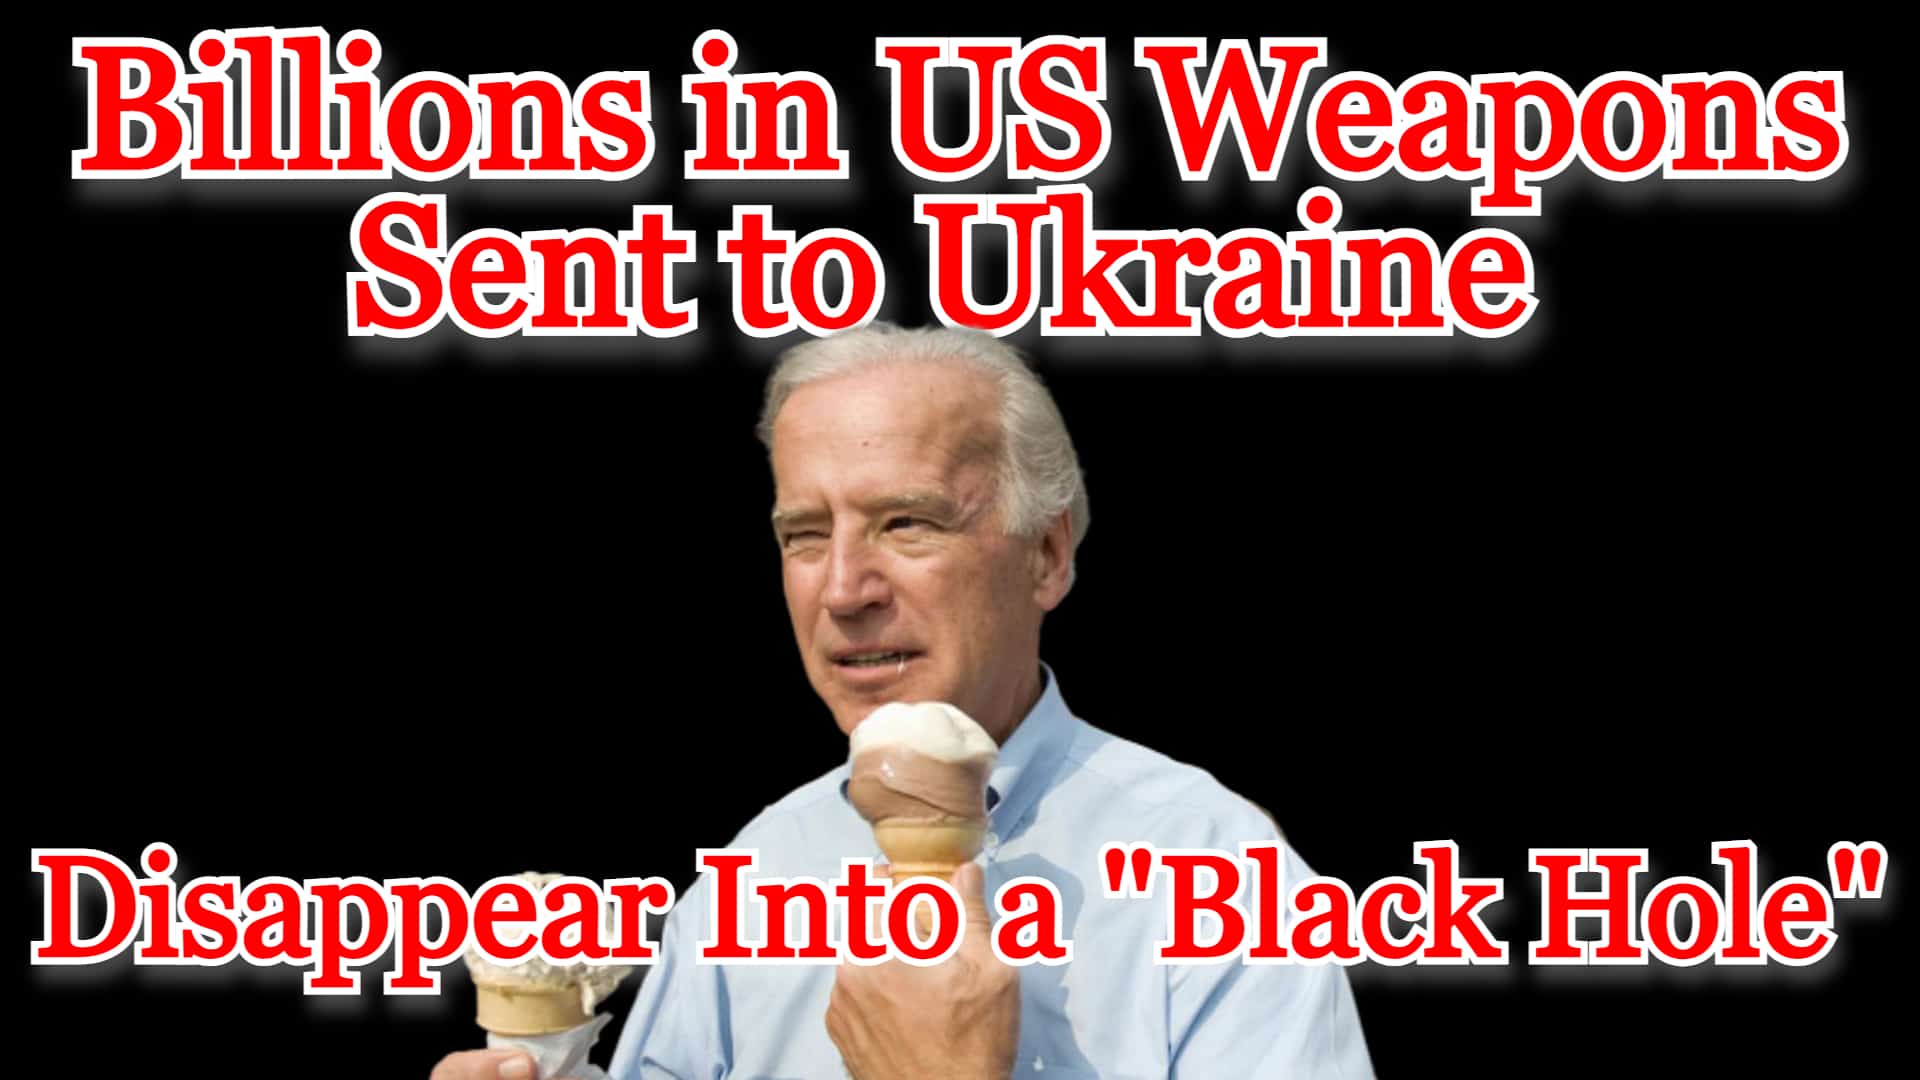 COI #264: Billions in US Weapons Sent to Ukraine Disappear Into a “Black Hole”